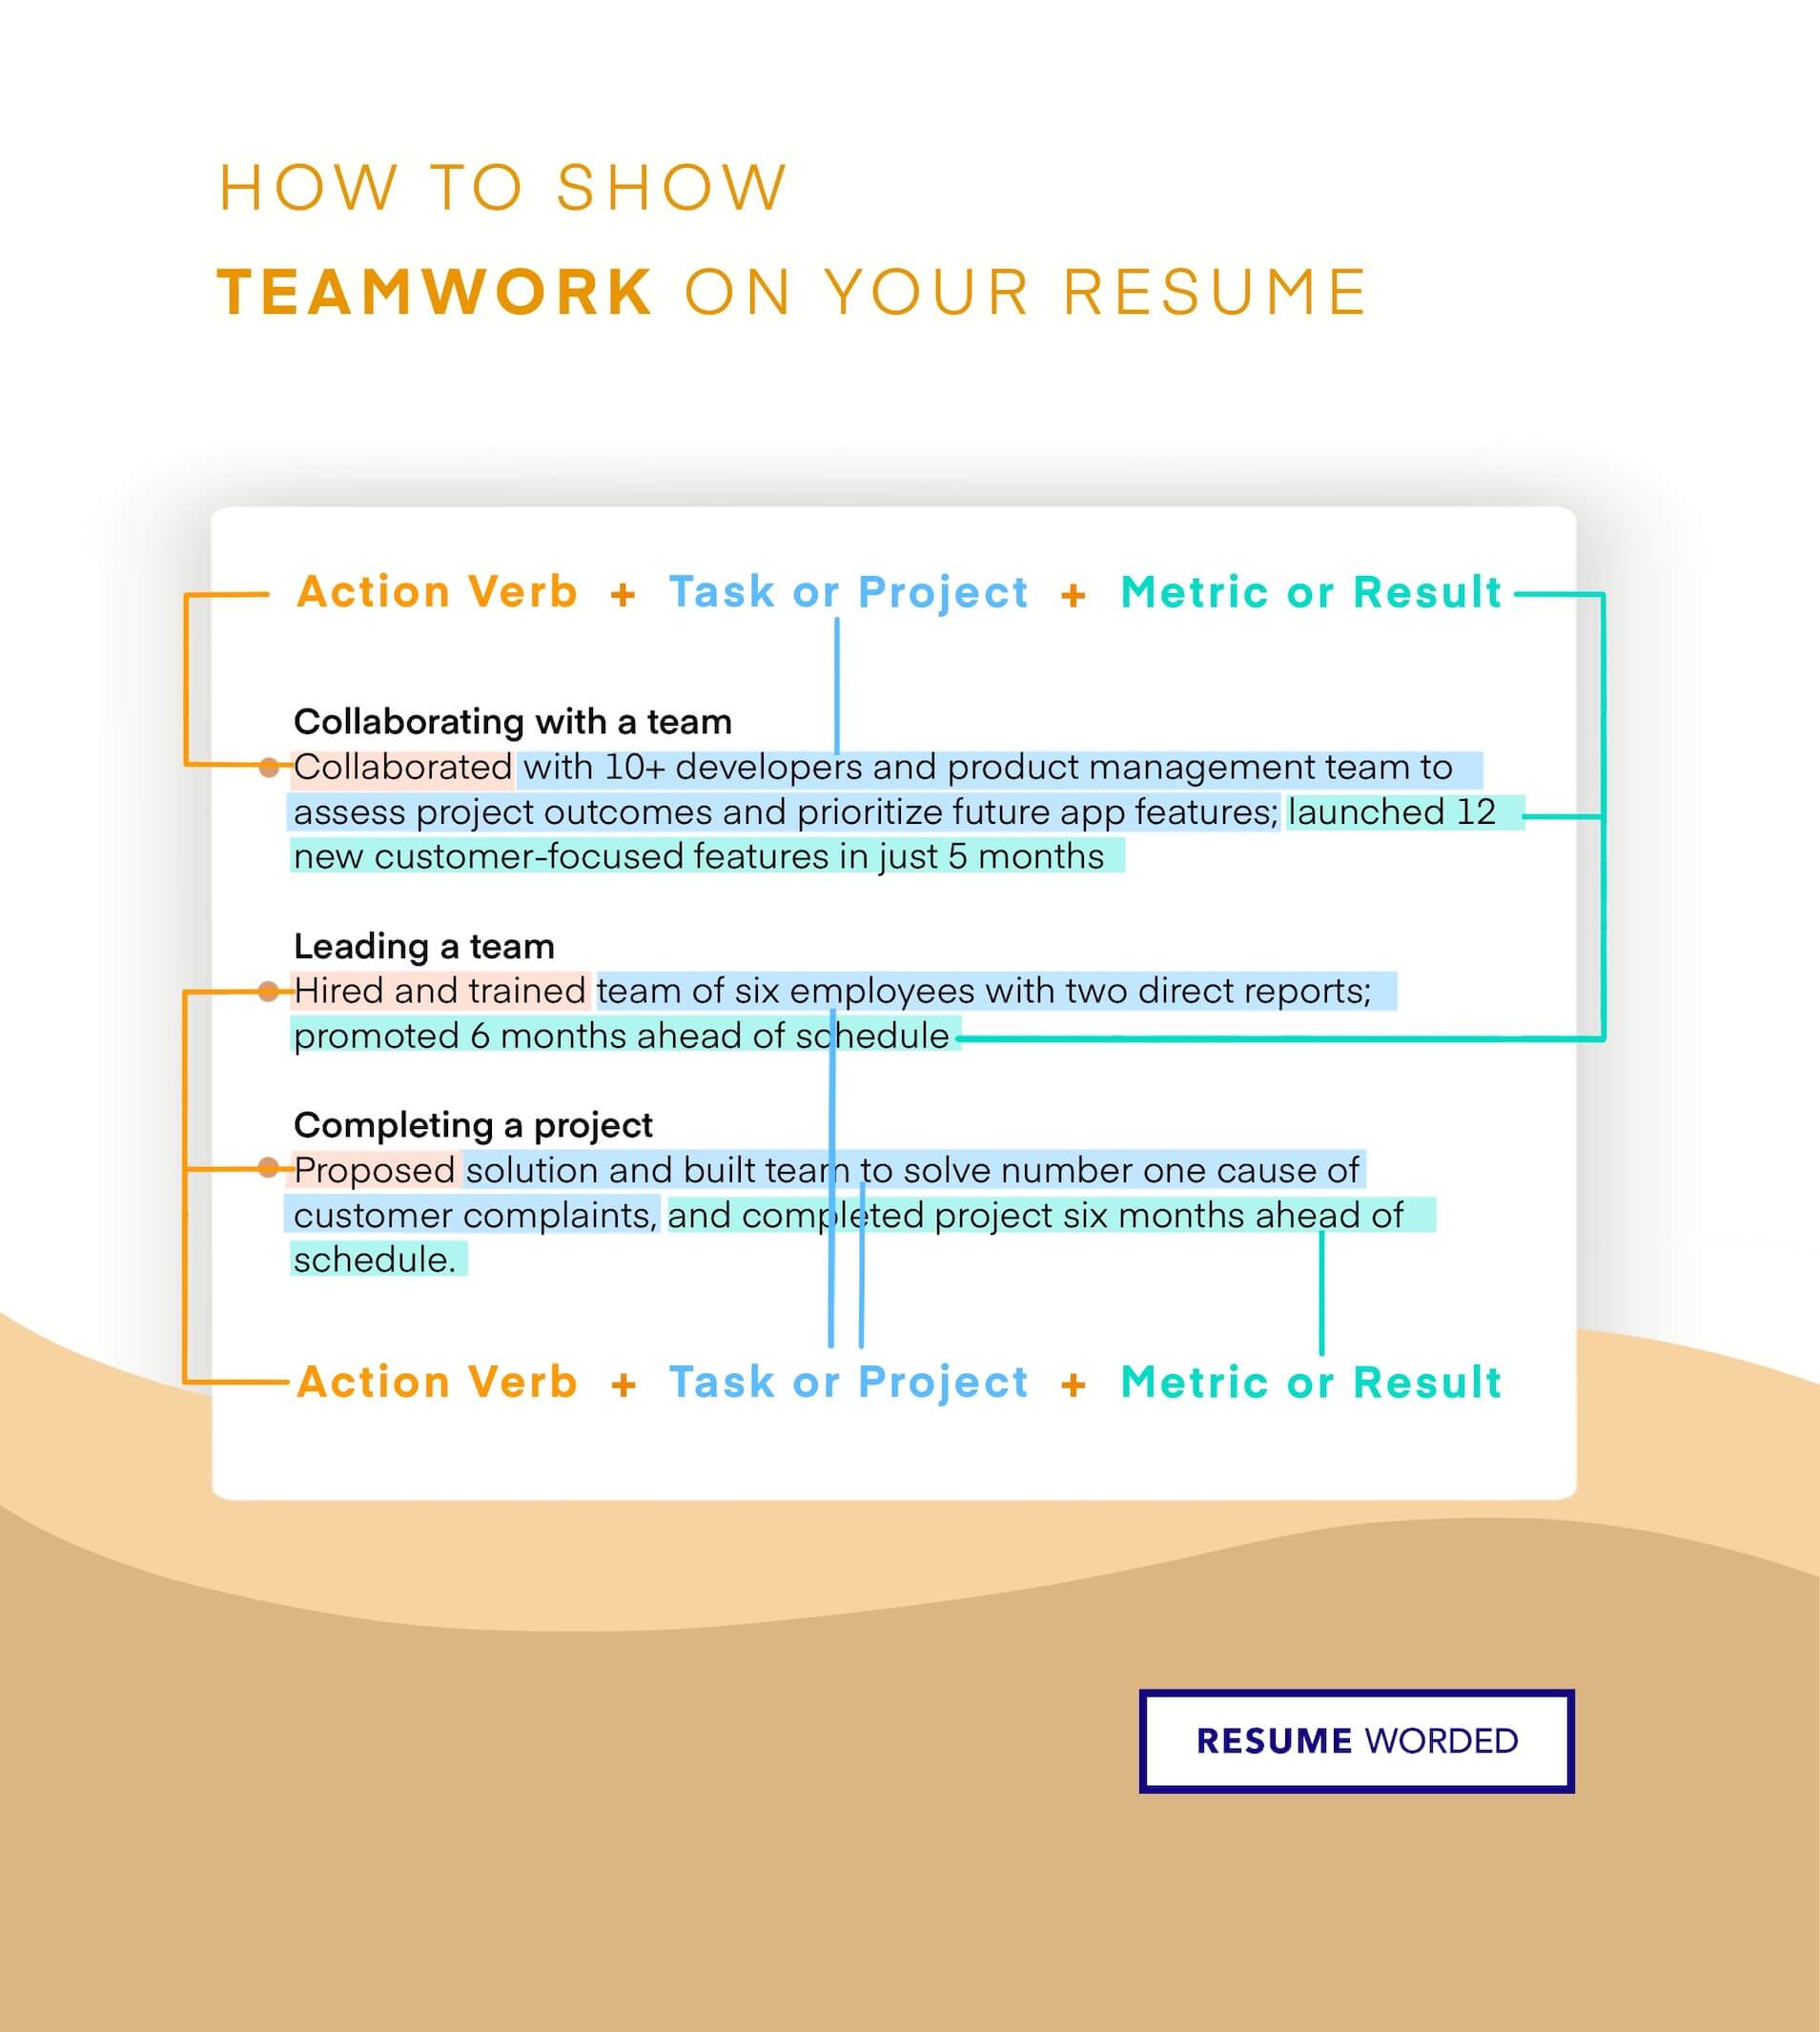 Showcase your multidisciplinary team experience - Clinical Social Worker Resume